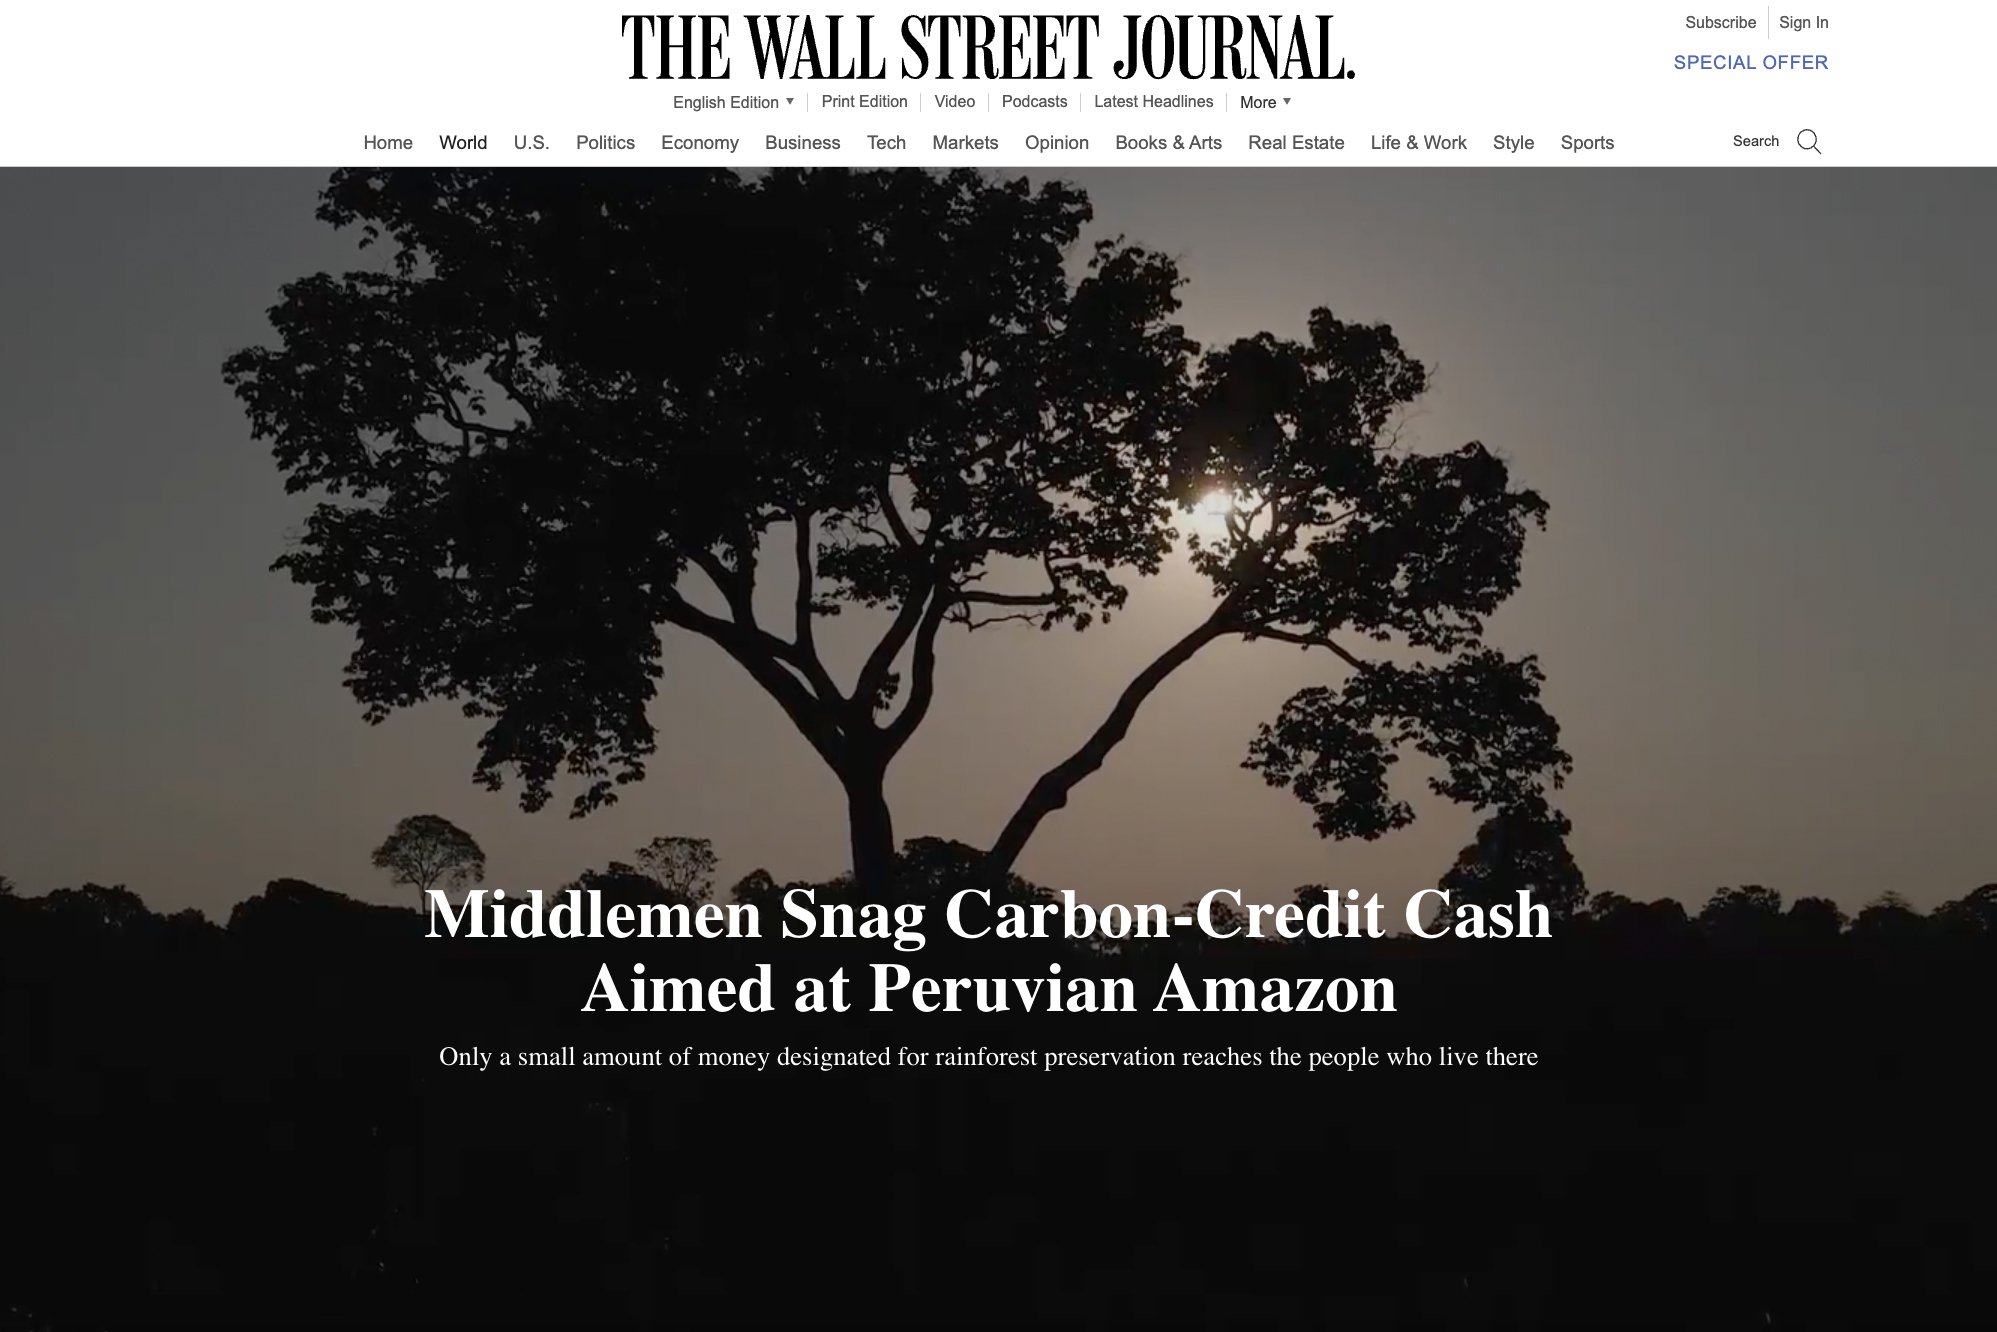 Cover Image for Assignment for The Wall Street Journal